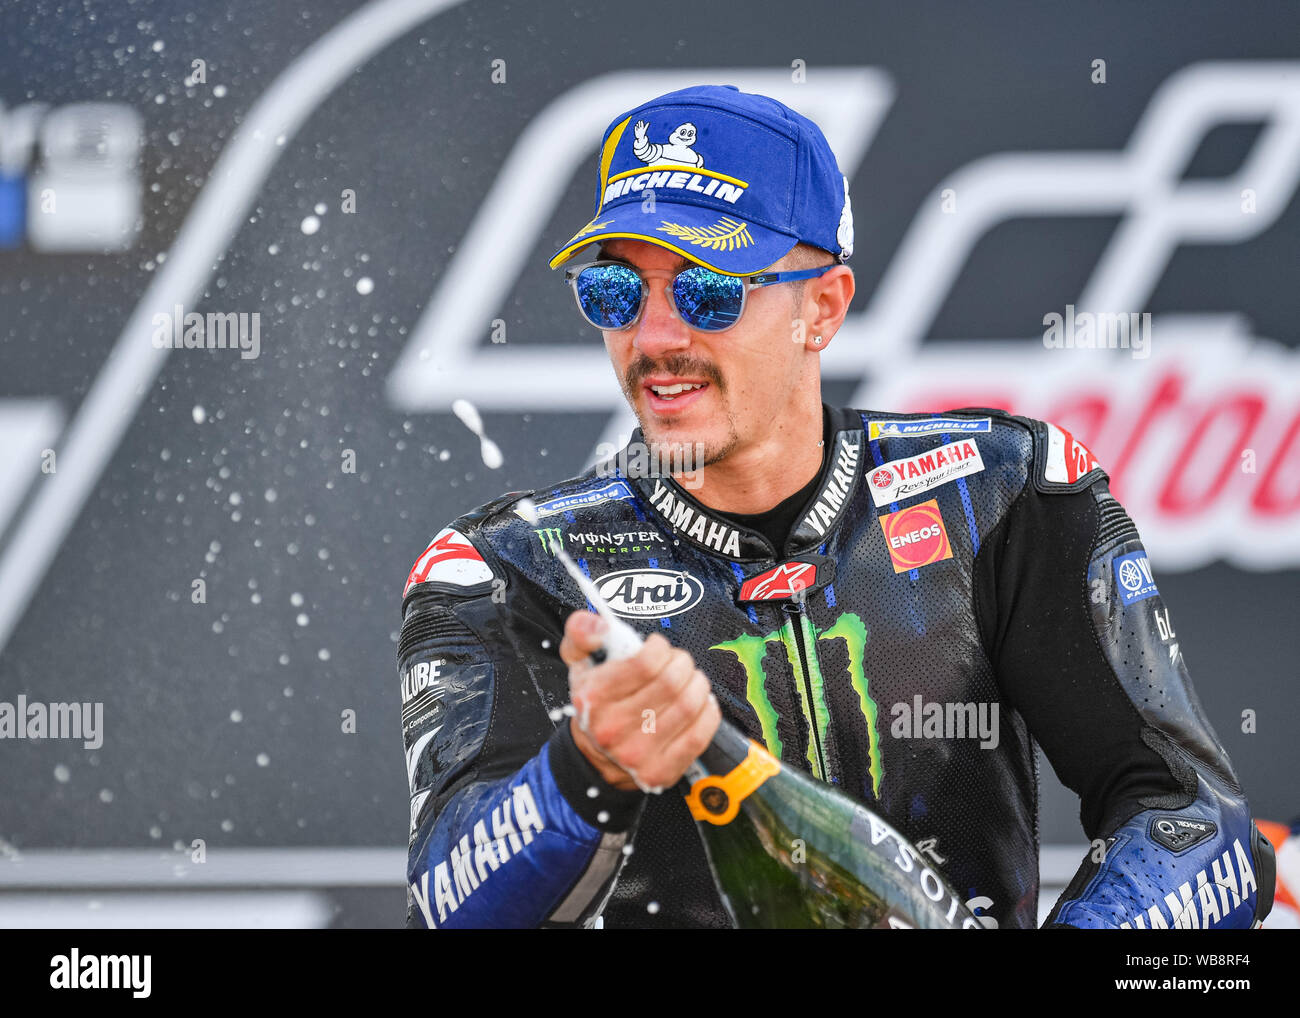 Towcester, UK. 25th Aug, 2019. Maverick Vi?ales (SPA) of Monster Energy Yamaha MotoGP celebrates with the Champagne after the Sunday Race at Winner’s presentation after the Sunday’s Race of  GoPro British Grand Prix at Silverstone Circuit on Sunday, August 25, 2019 in TOWCESTER, ENGLAND. Credit: Taka G Wu/Alamy Live News Stock Photo